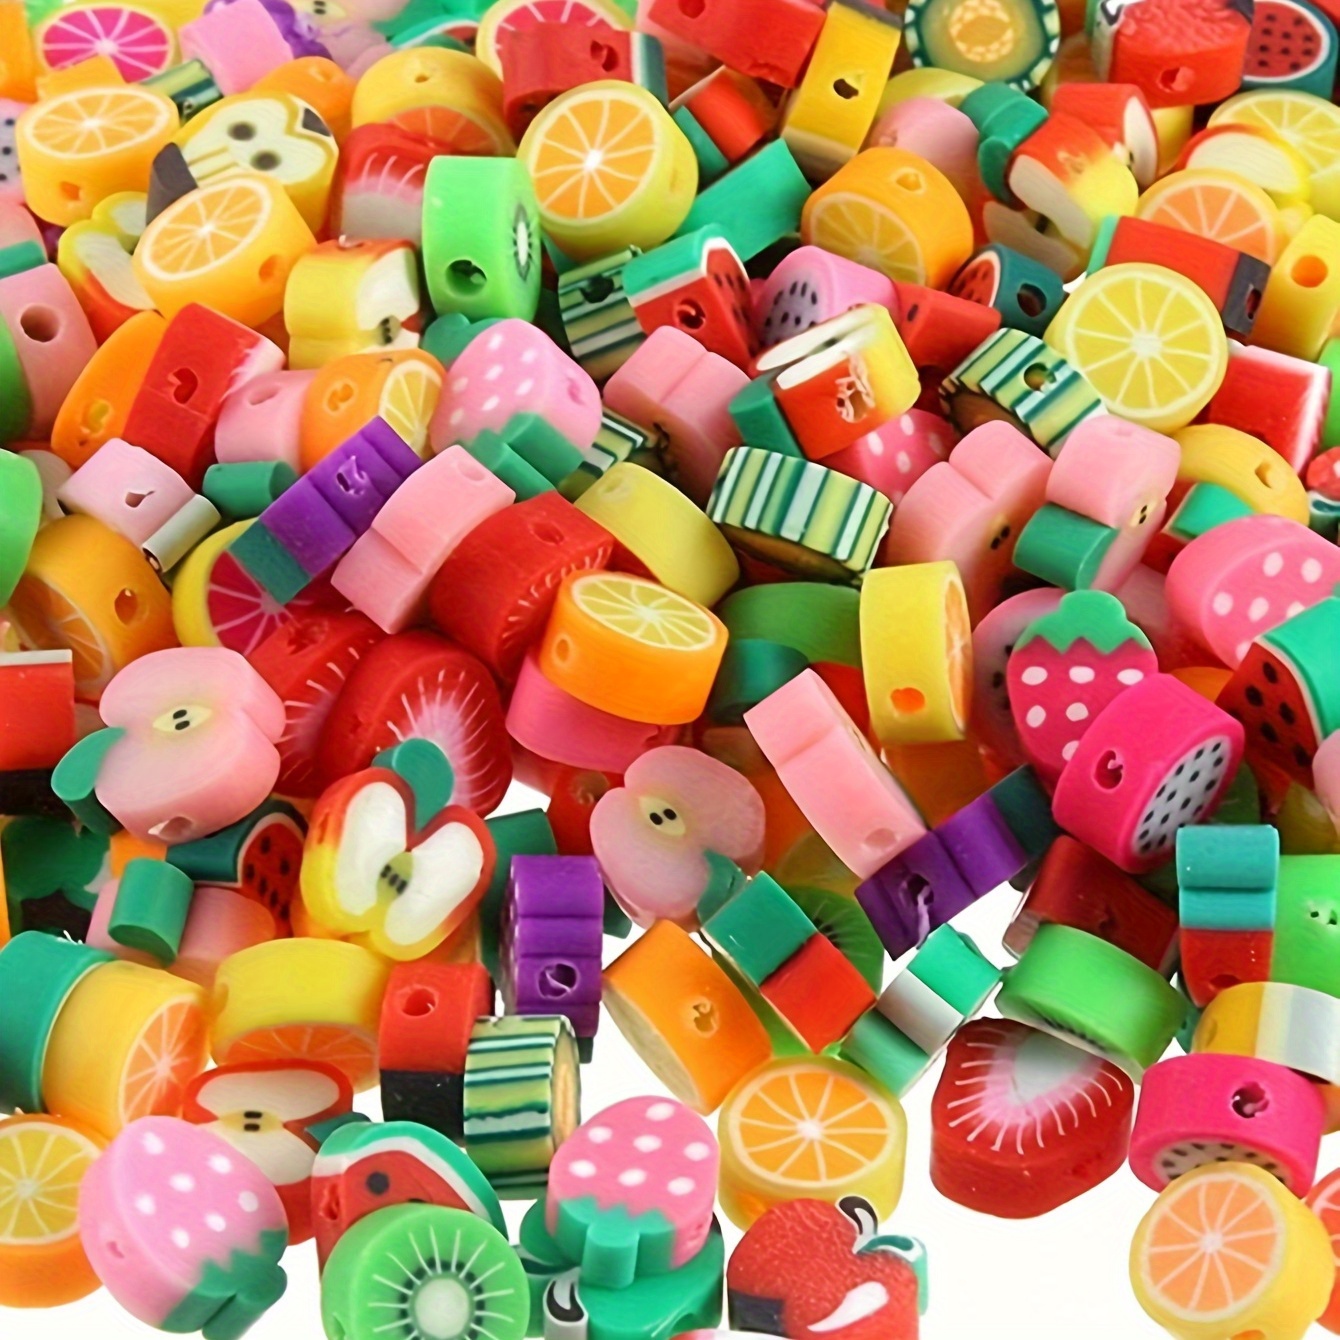 

About 100pcs Fruit Polymer Clay Mixed Spacer Beads For Jewelry Making Summer Diy Necklace Bracelet Earrings Handmade Craft Supplies